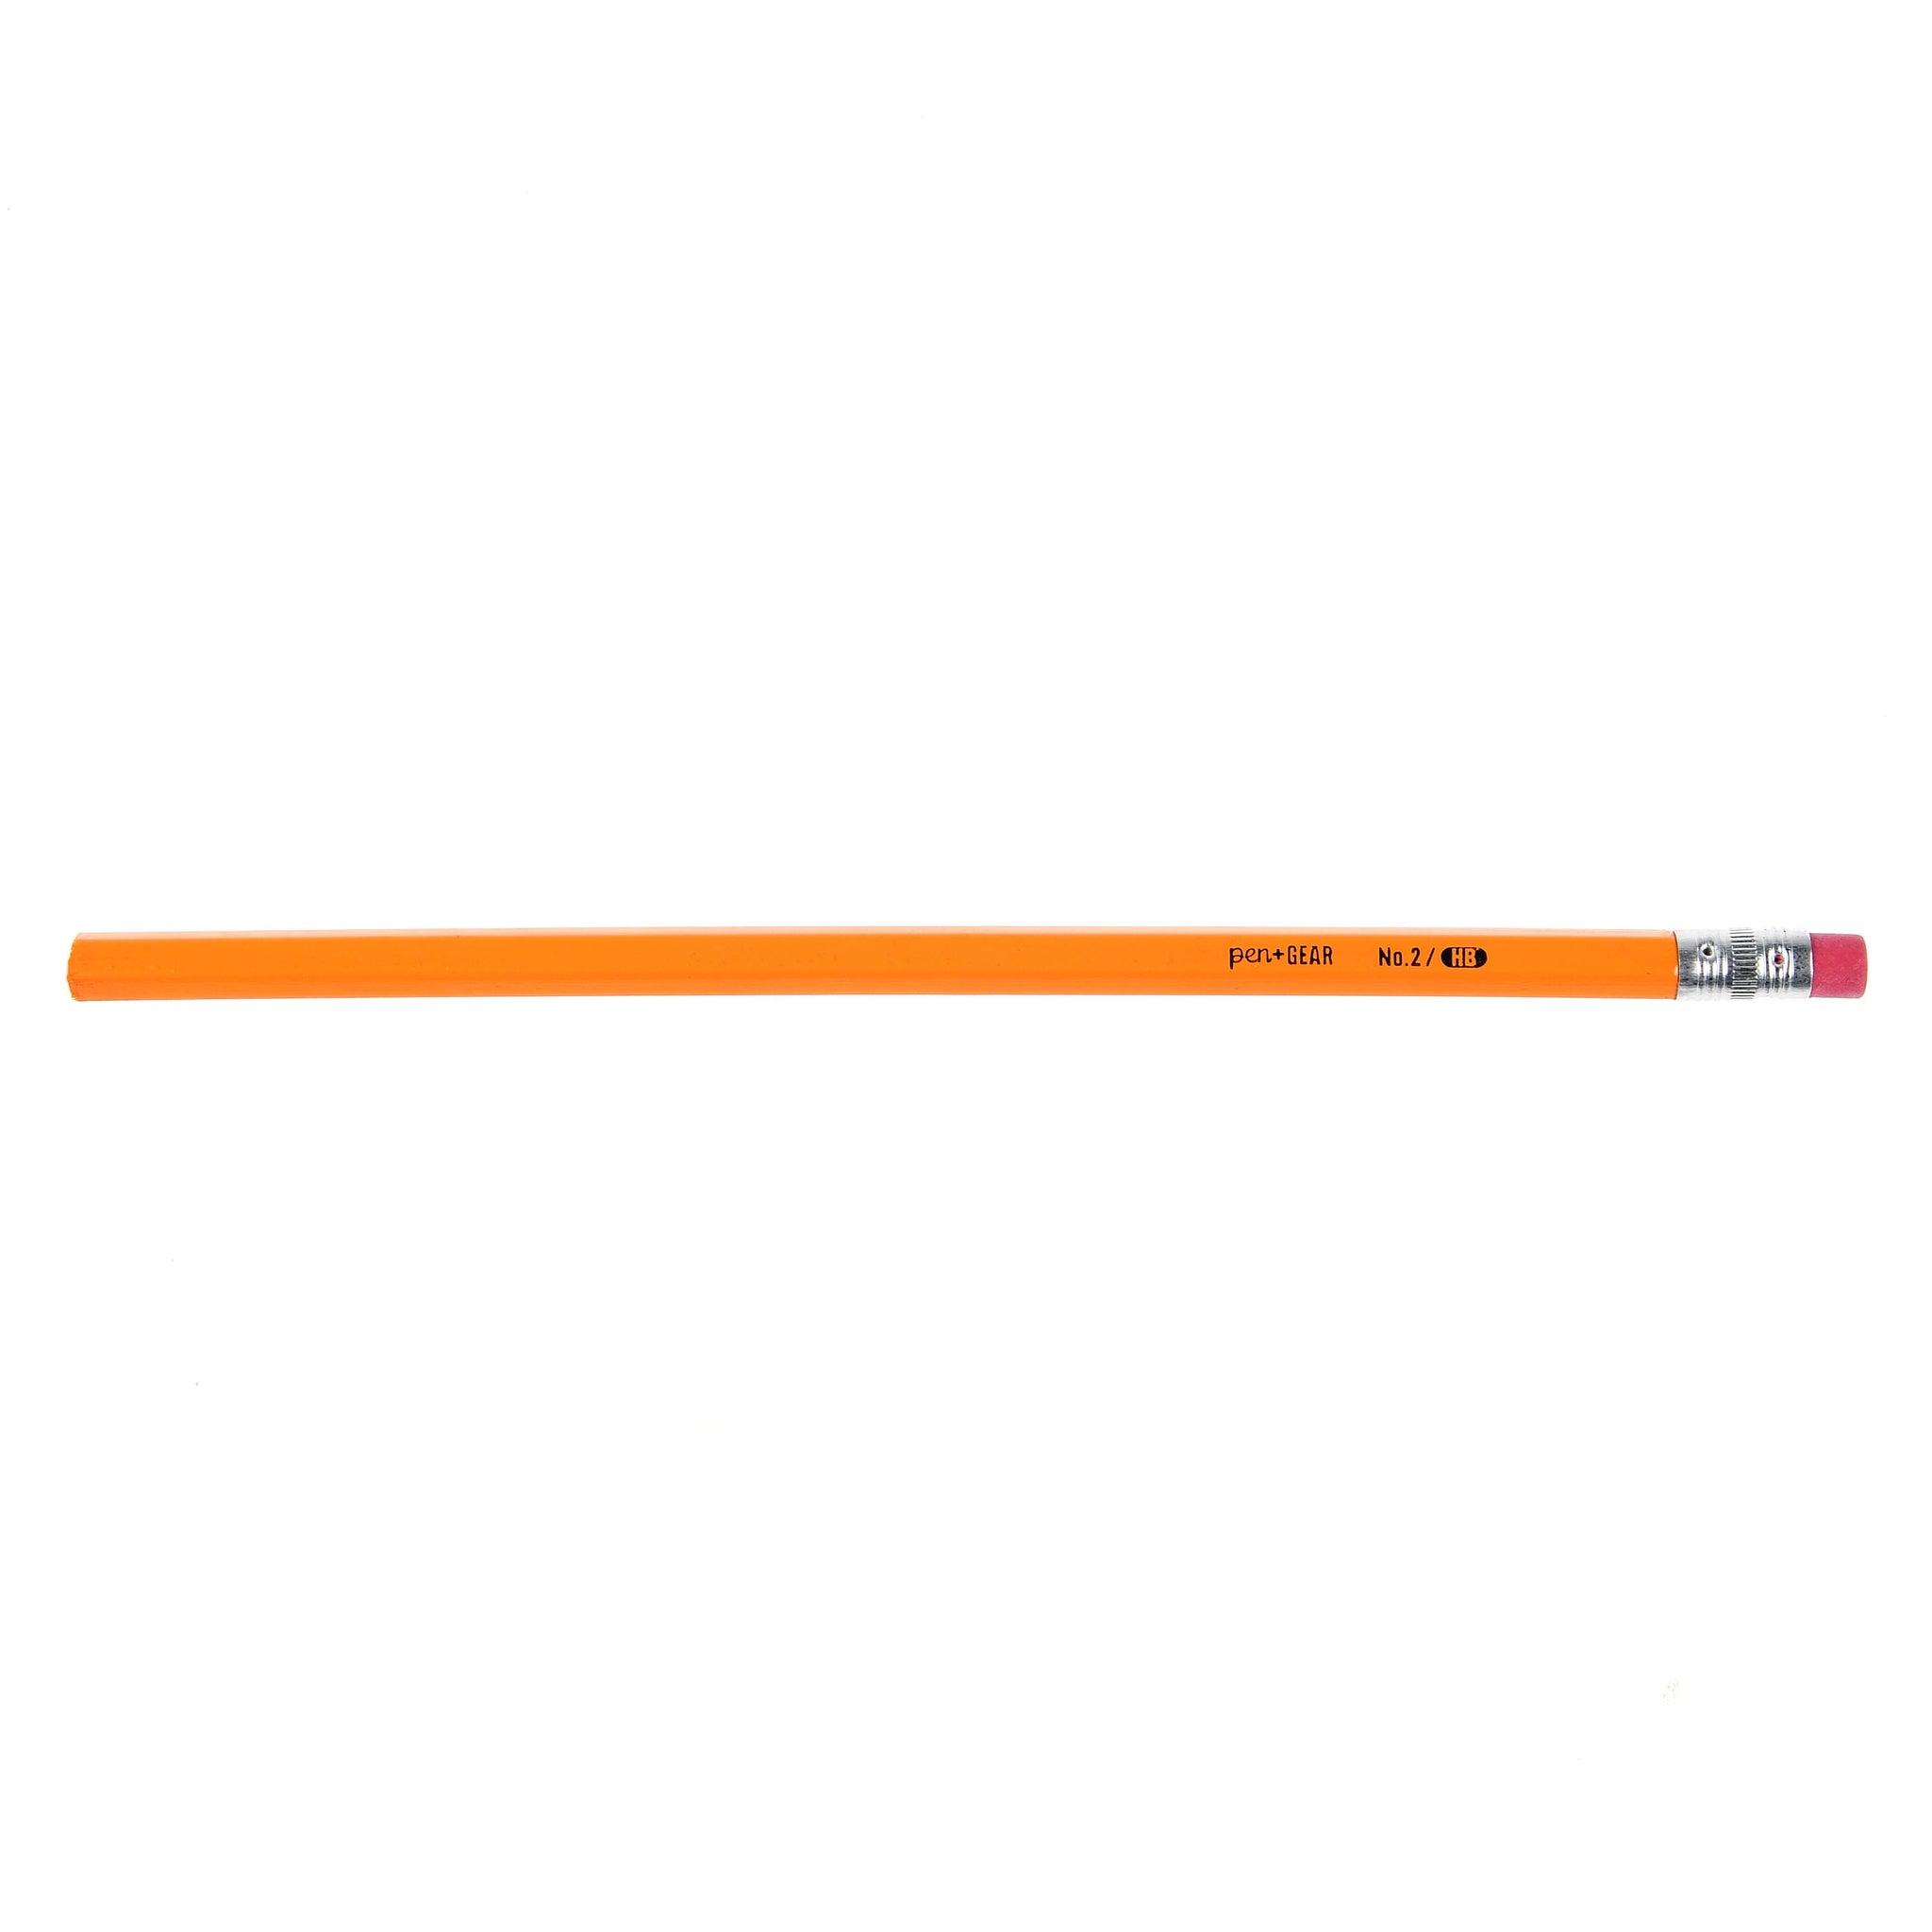 image 4 of Pen + Gear No. 2 Wood Pencils, Unsharpened, 24 Count